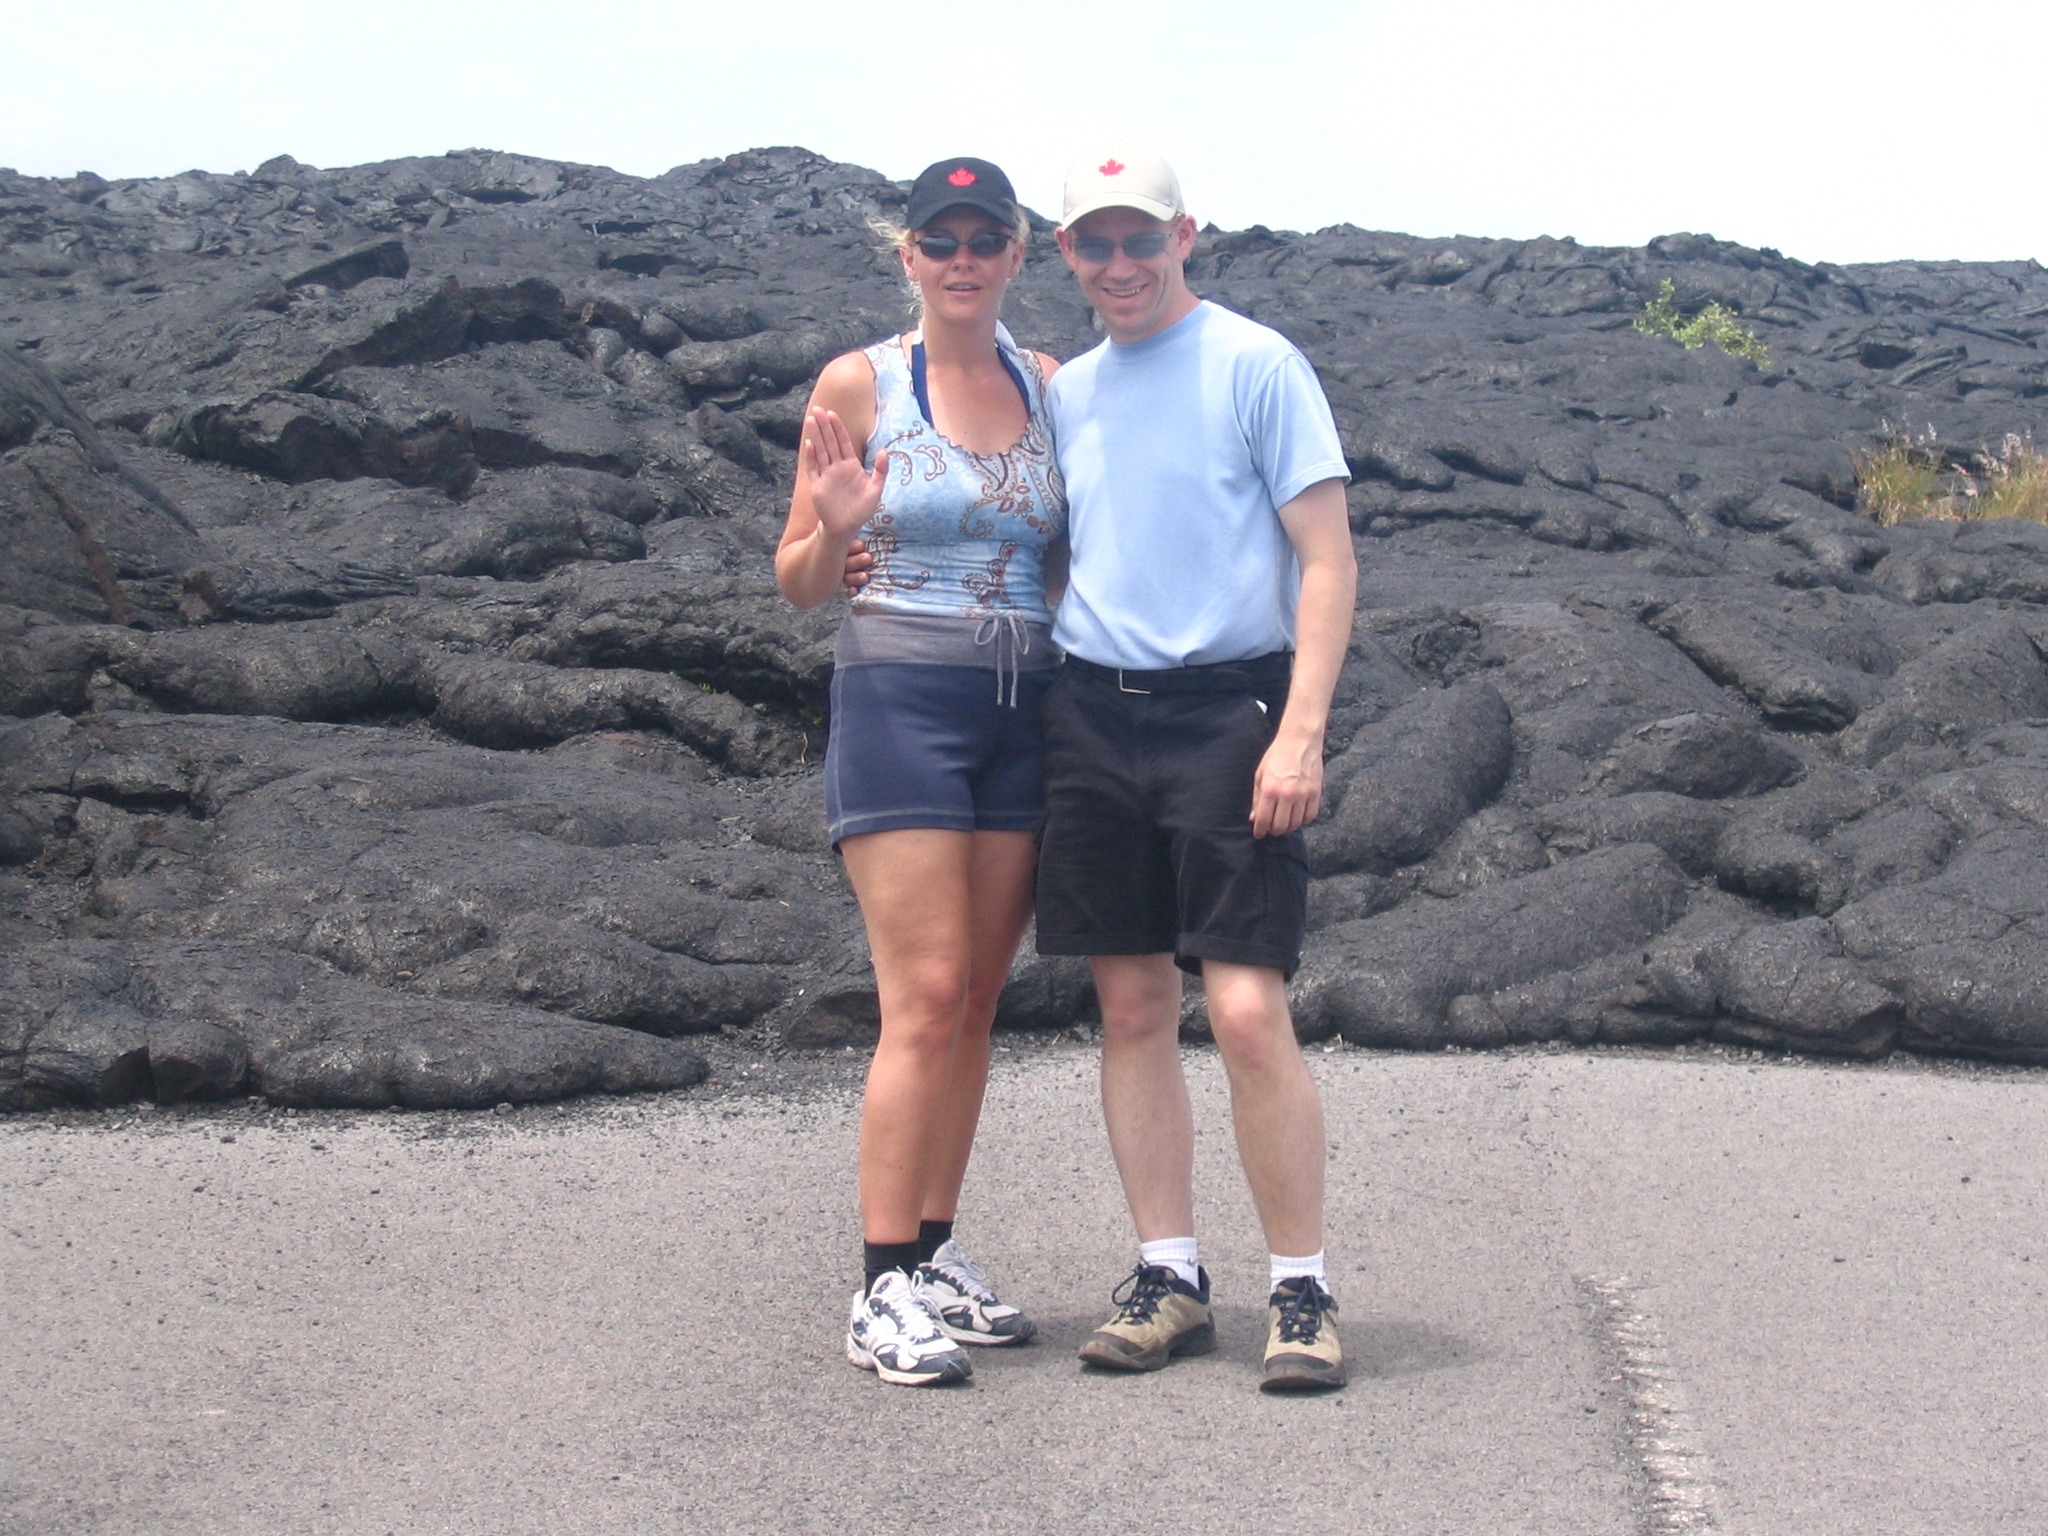 Nancy & Shawn Power at a road blocked off by lava flow